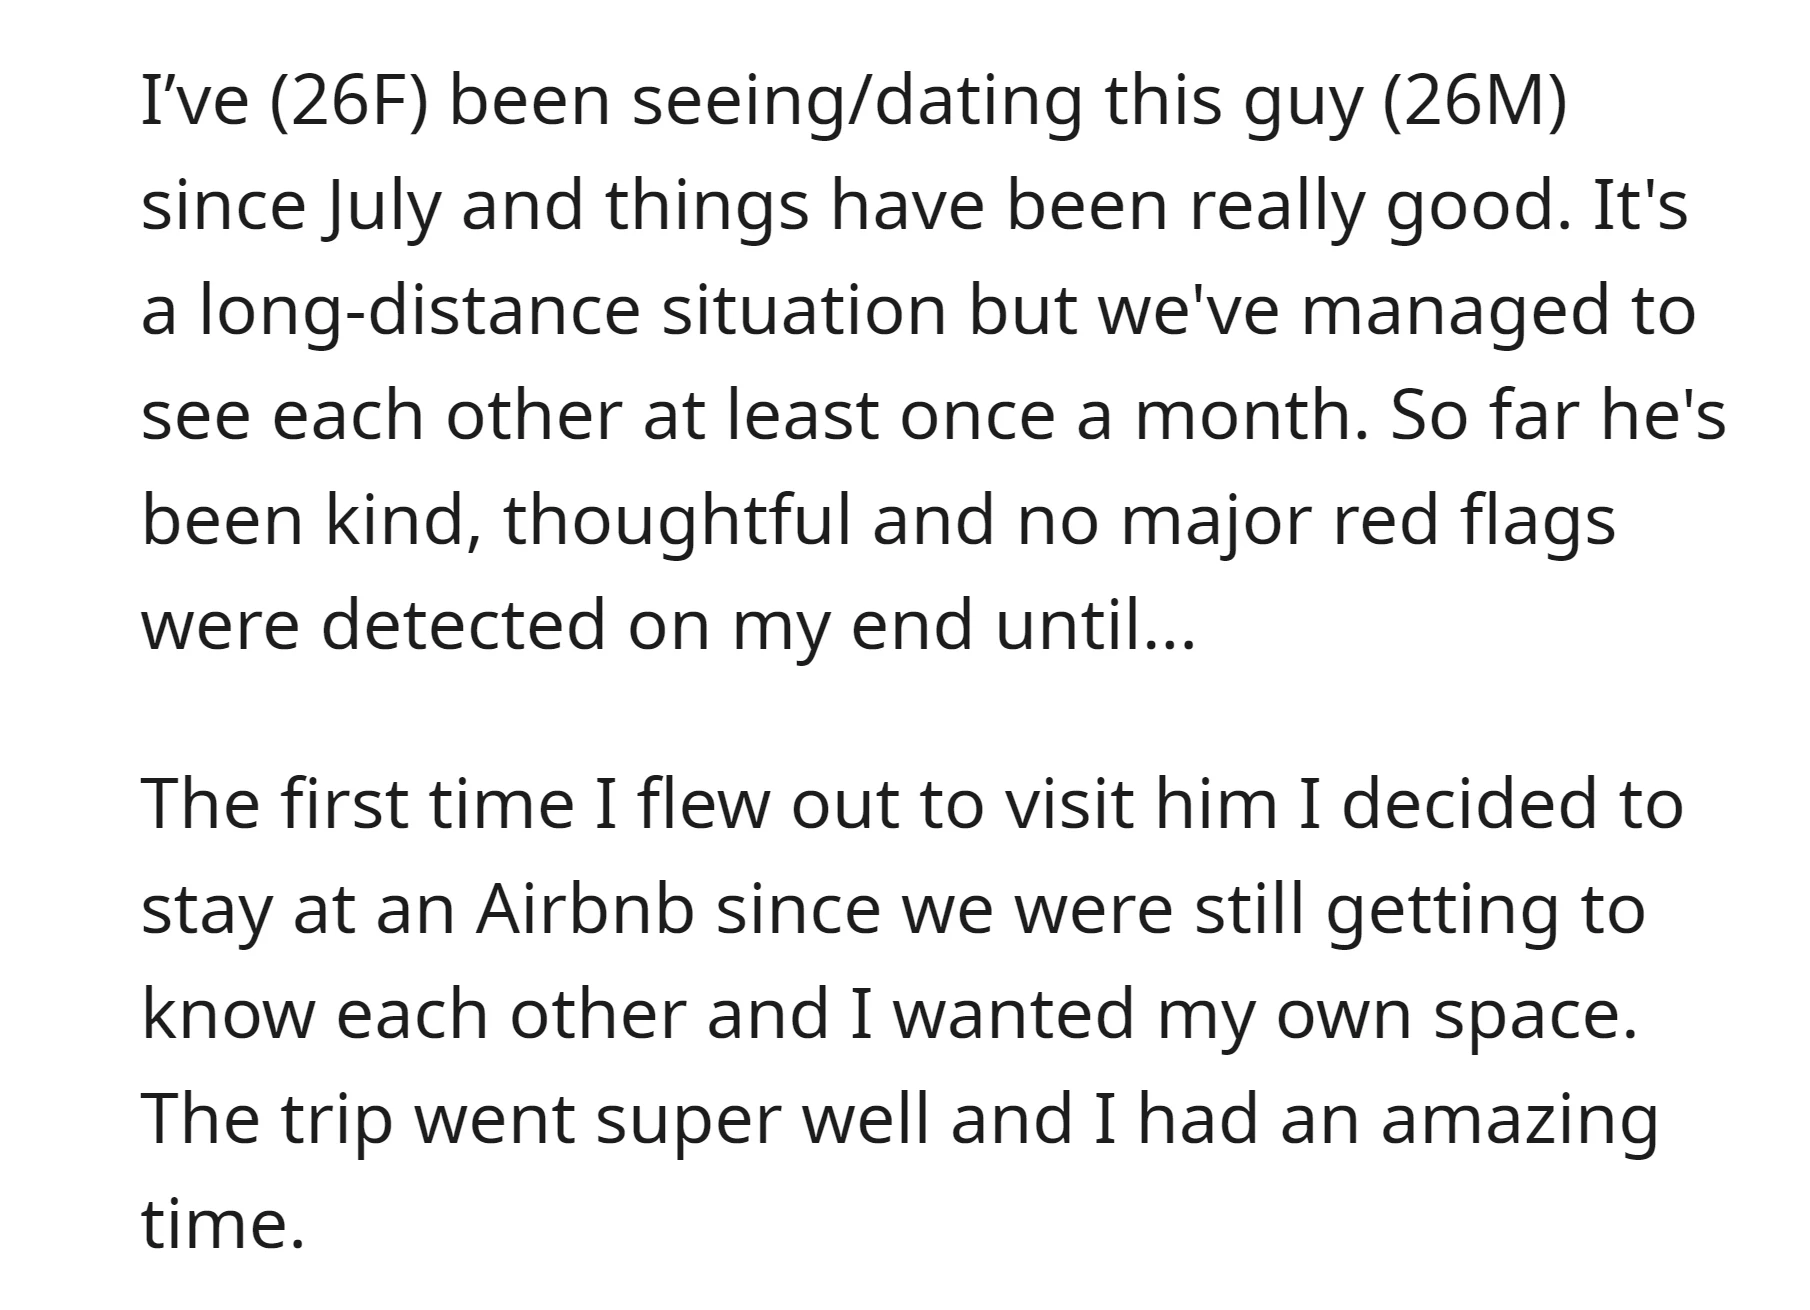 OP has been dating a guy long-distance with monthly visits